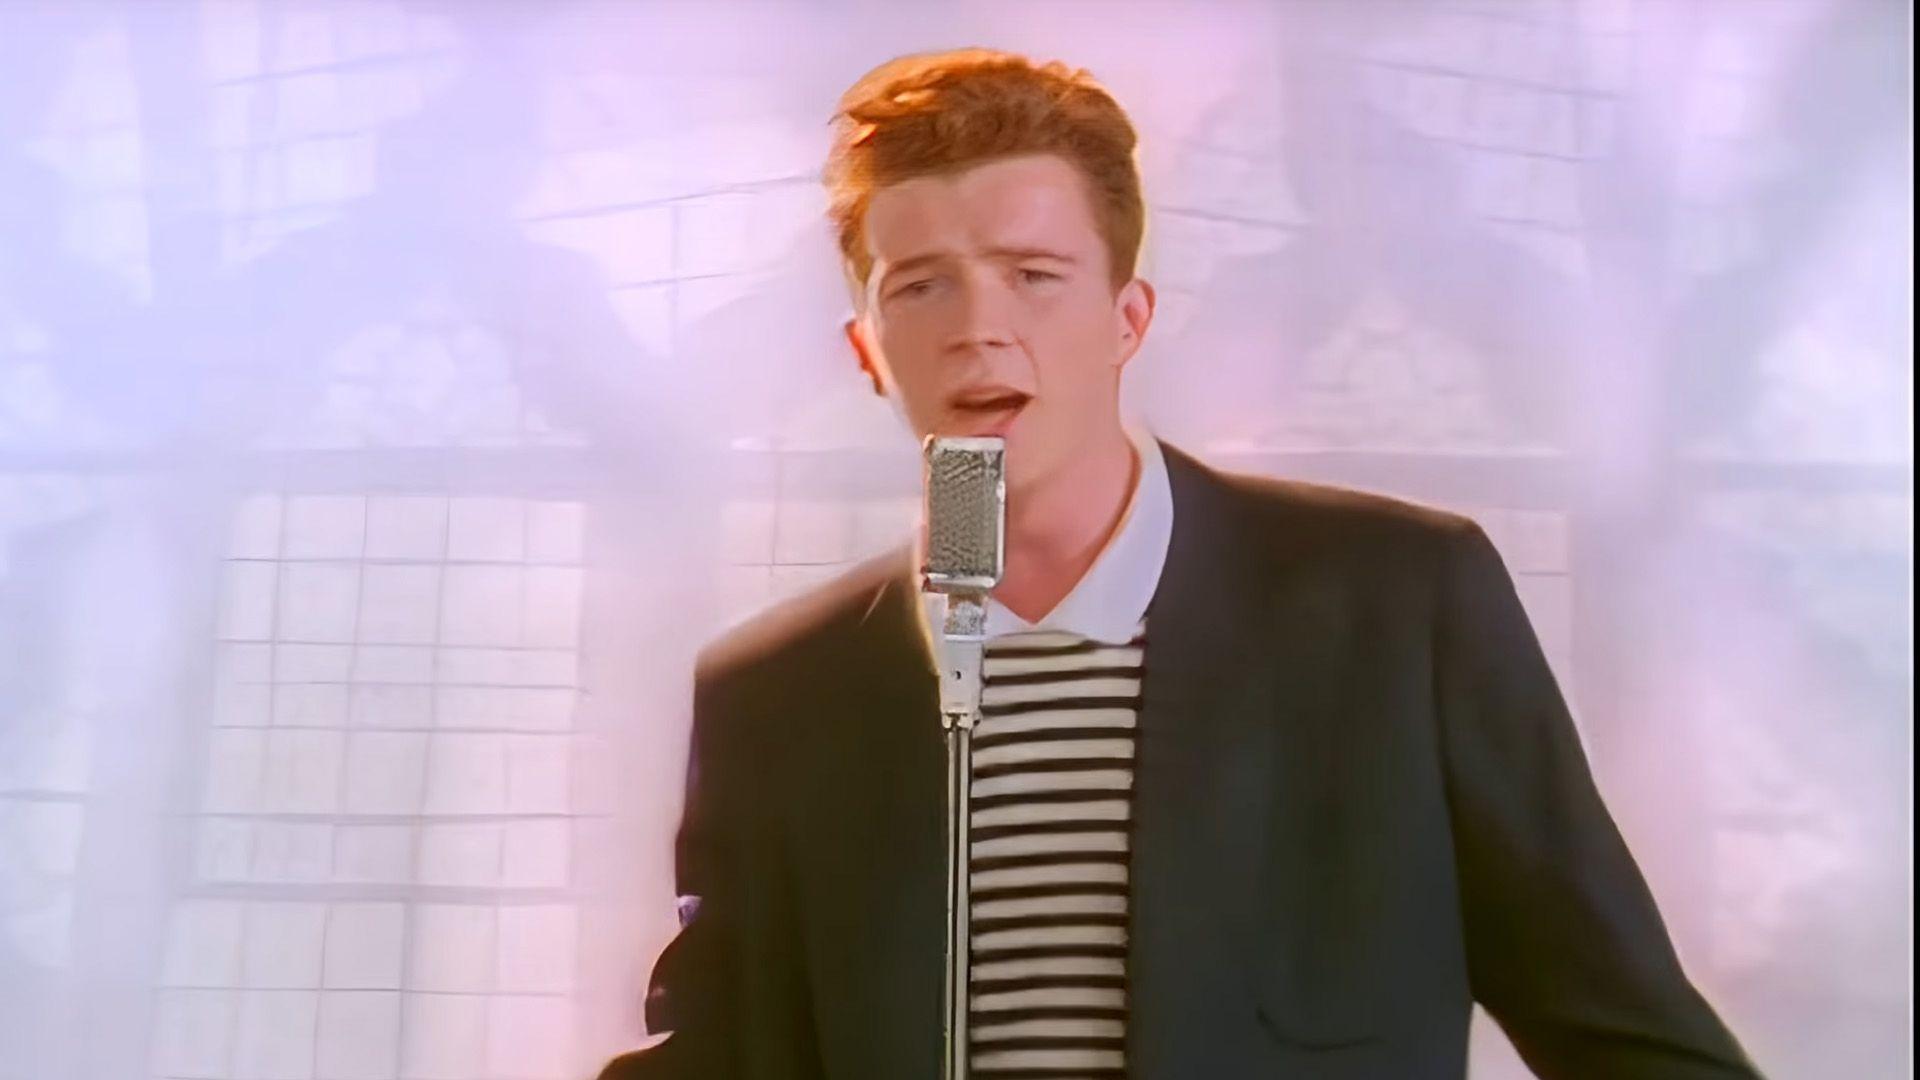 Never Gonna Give You Up Wallpapers - Top Free Never Gonna Give You Up ...